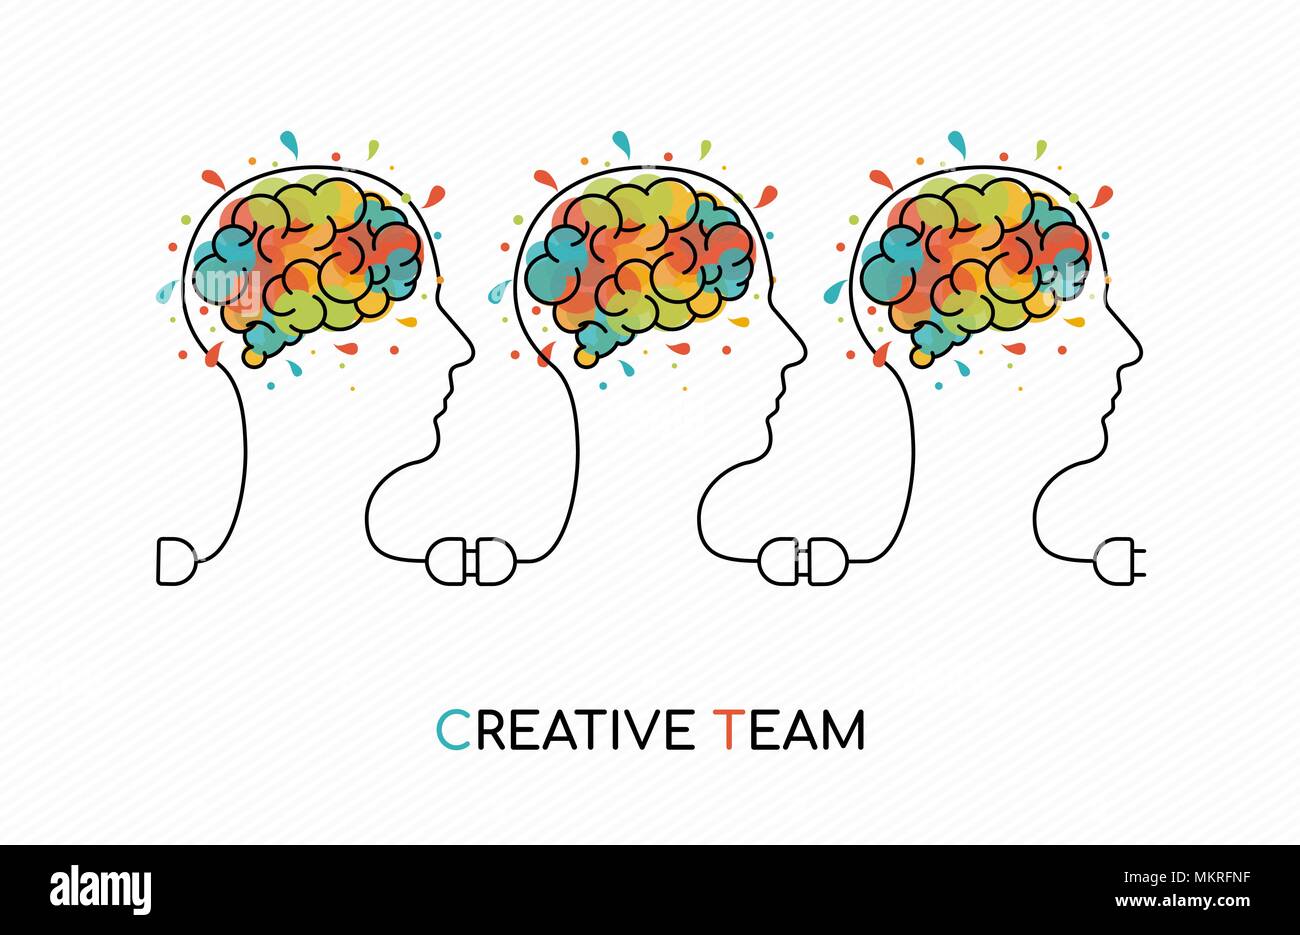 Creative teamwork concept outline style illustration with people team as power wire and colorful art splash human brain. EPS10 vector. Stock Vector